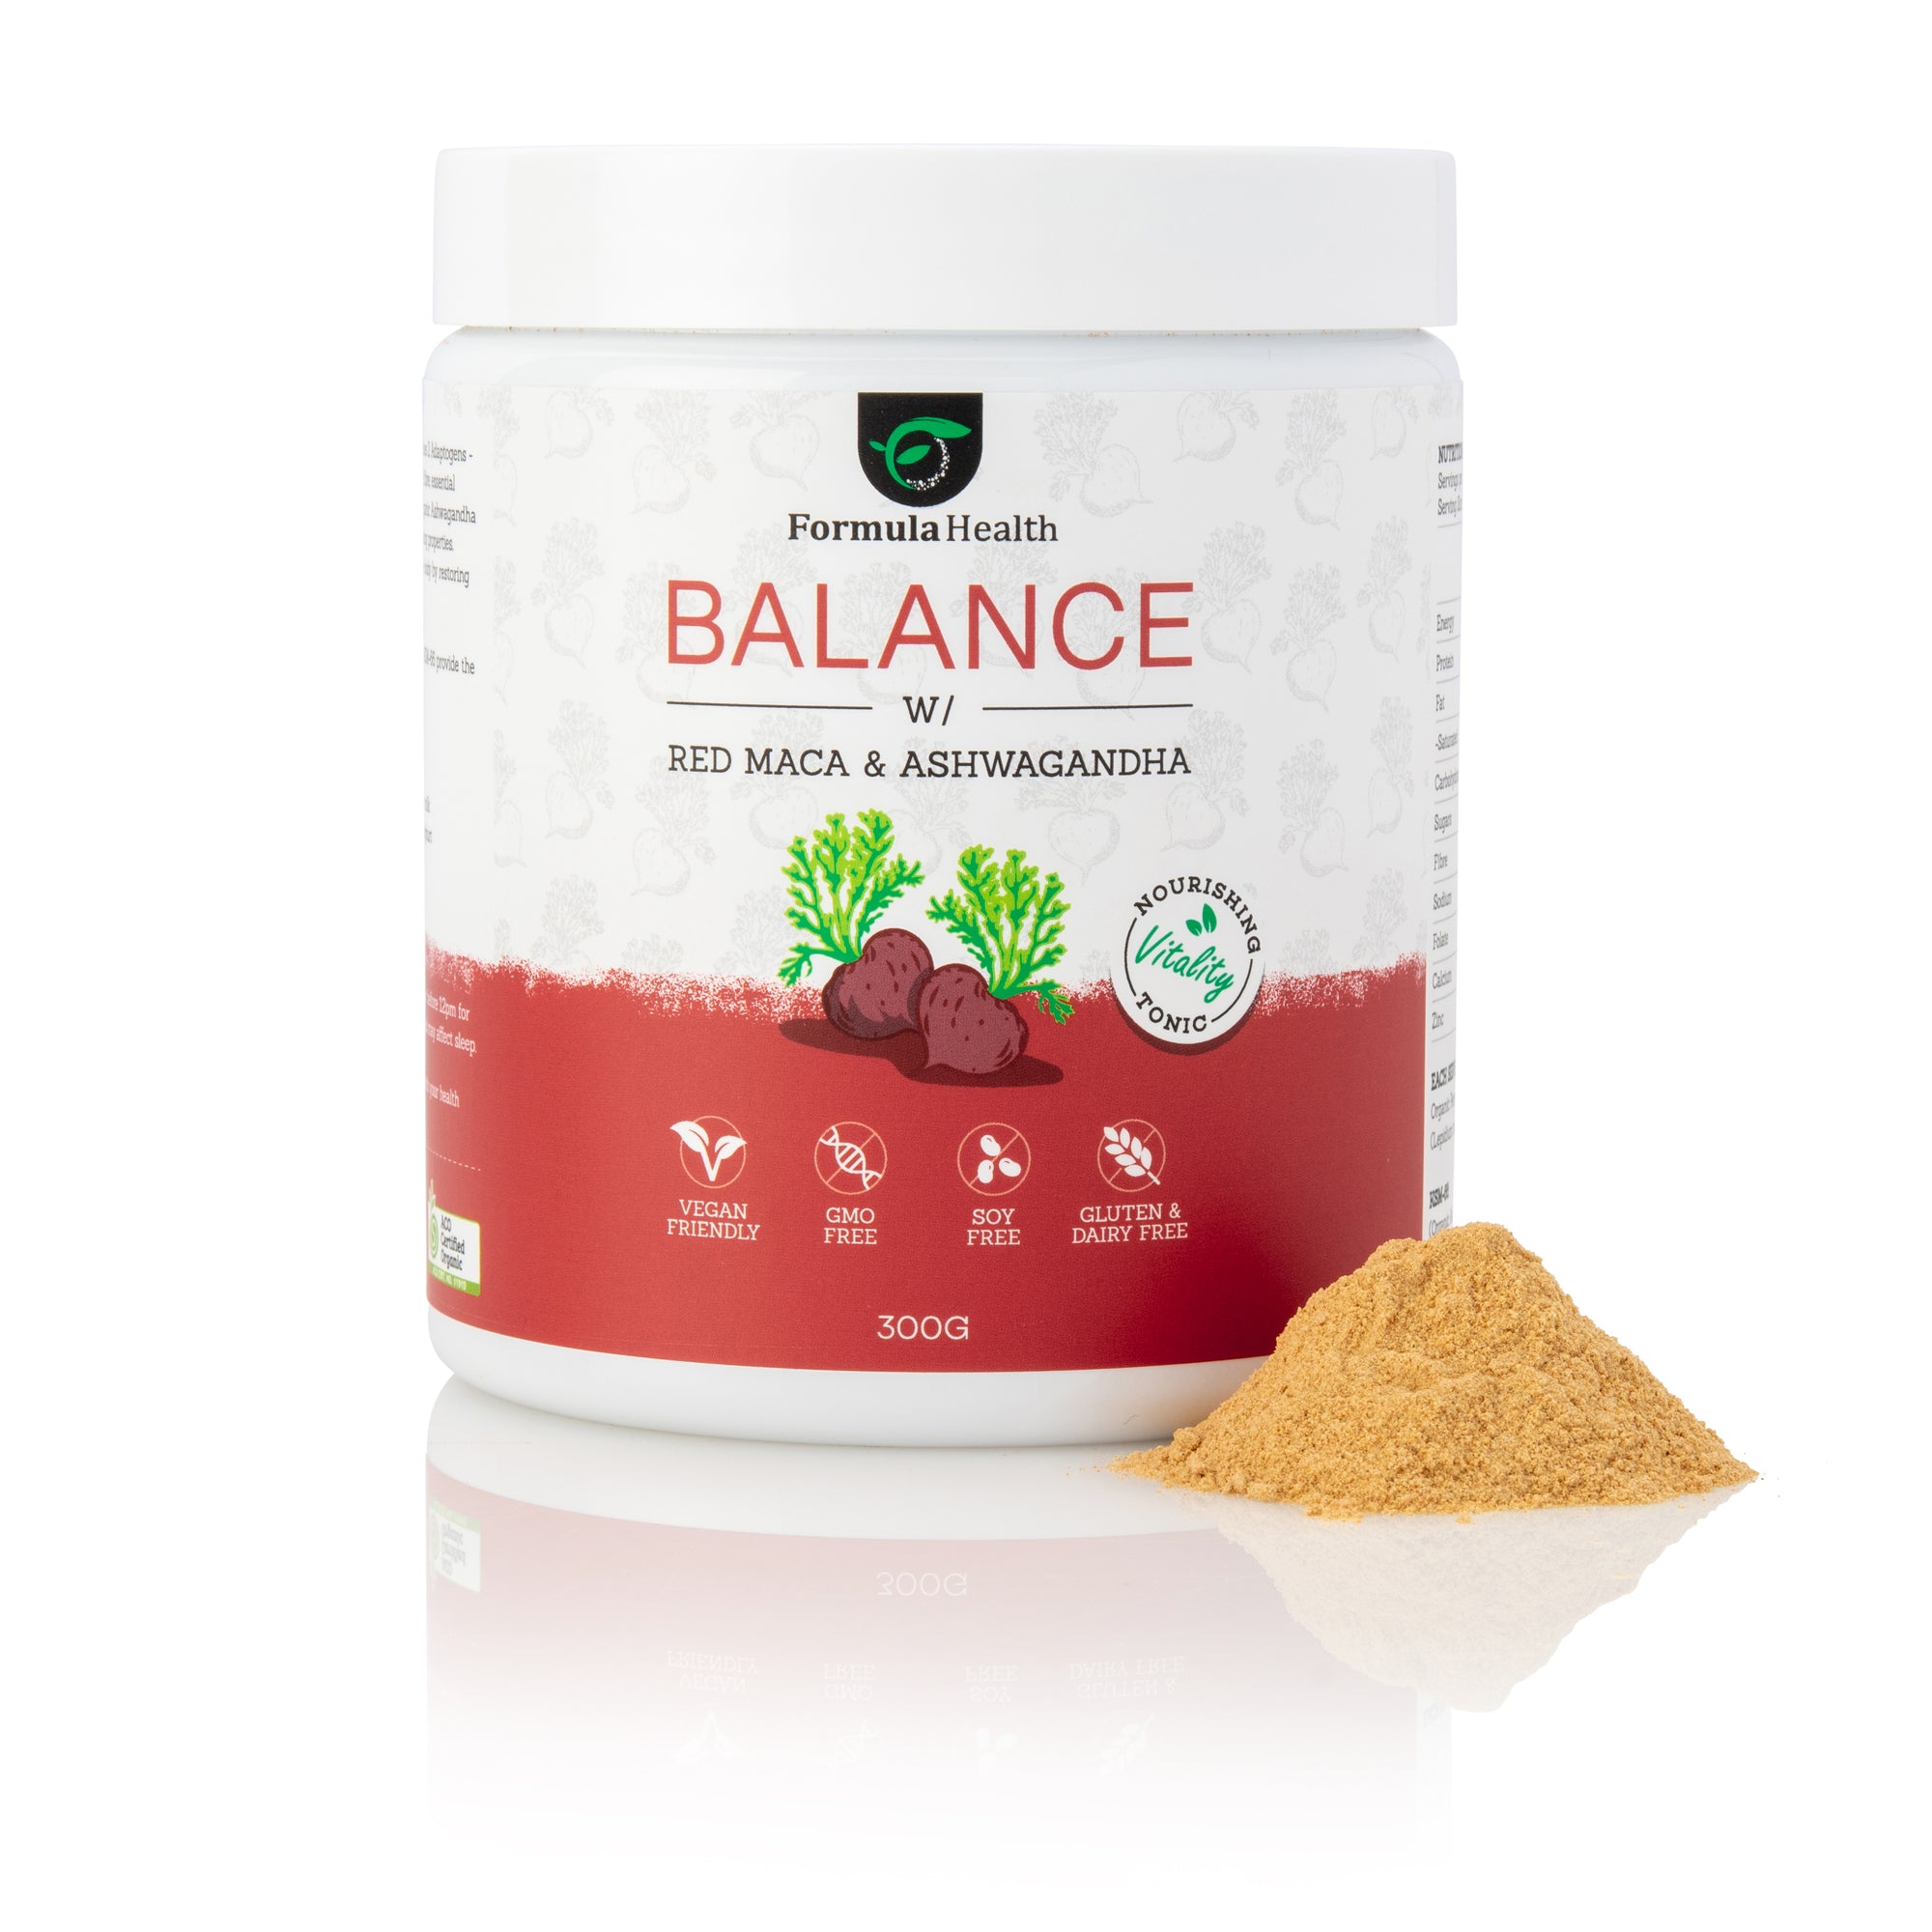 Balance with Red Maca - The wind beneath your wings.